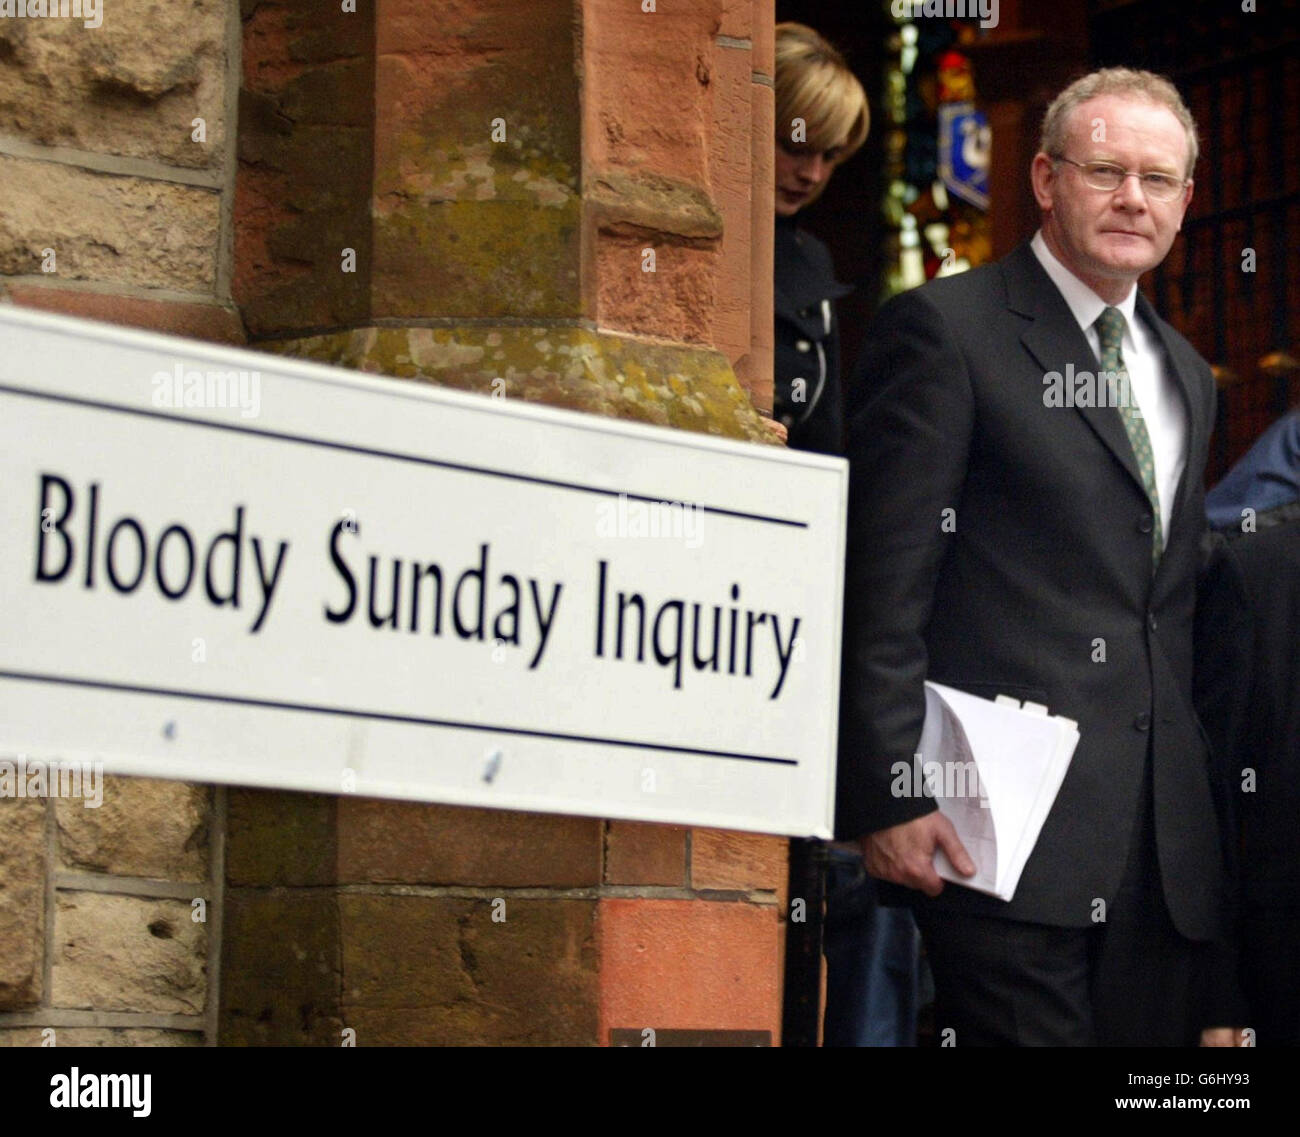 Sinn Fein's Martin McGuinness as he departs from the Guildhall in Londonderry after giving evidence to the Saville Inquiry, into the Bloody Sunday tribunal. Mr McGuinness, who has admitted being second in command of the IRA on Bloody Sunday, said he was at the Saville Inquiry to tell the truth about Bloody Sunday. 10/12/03: Sinn Fein's Martin McGuinness. The Provisional IRA's quartermaster on Bloody Sunday was giving evidence anonymously to the Saville Inquiry. The witness known as PIRA 17, the first member of the Provos to apply not to have his identity revealed, was expected to tell the Stock Photo